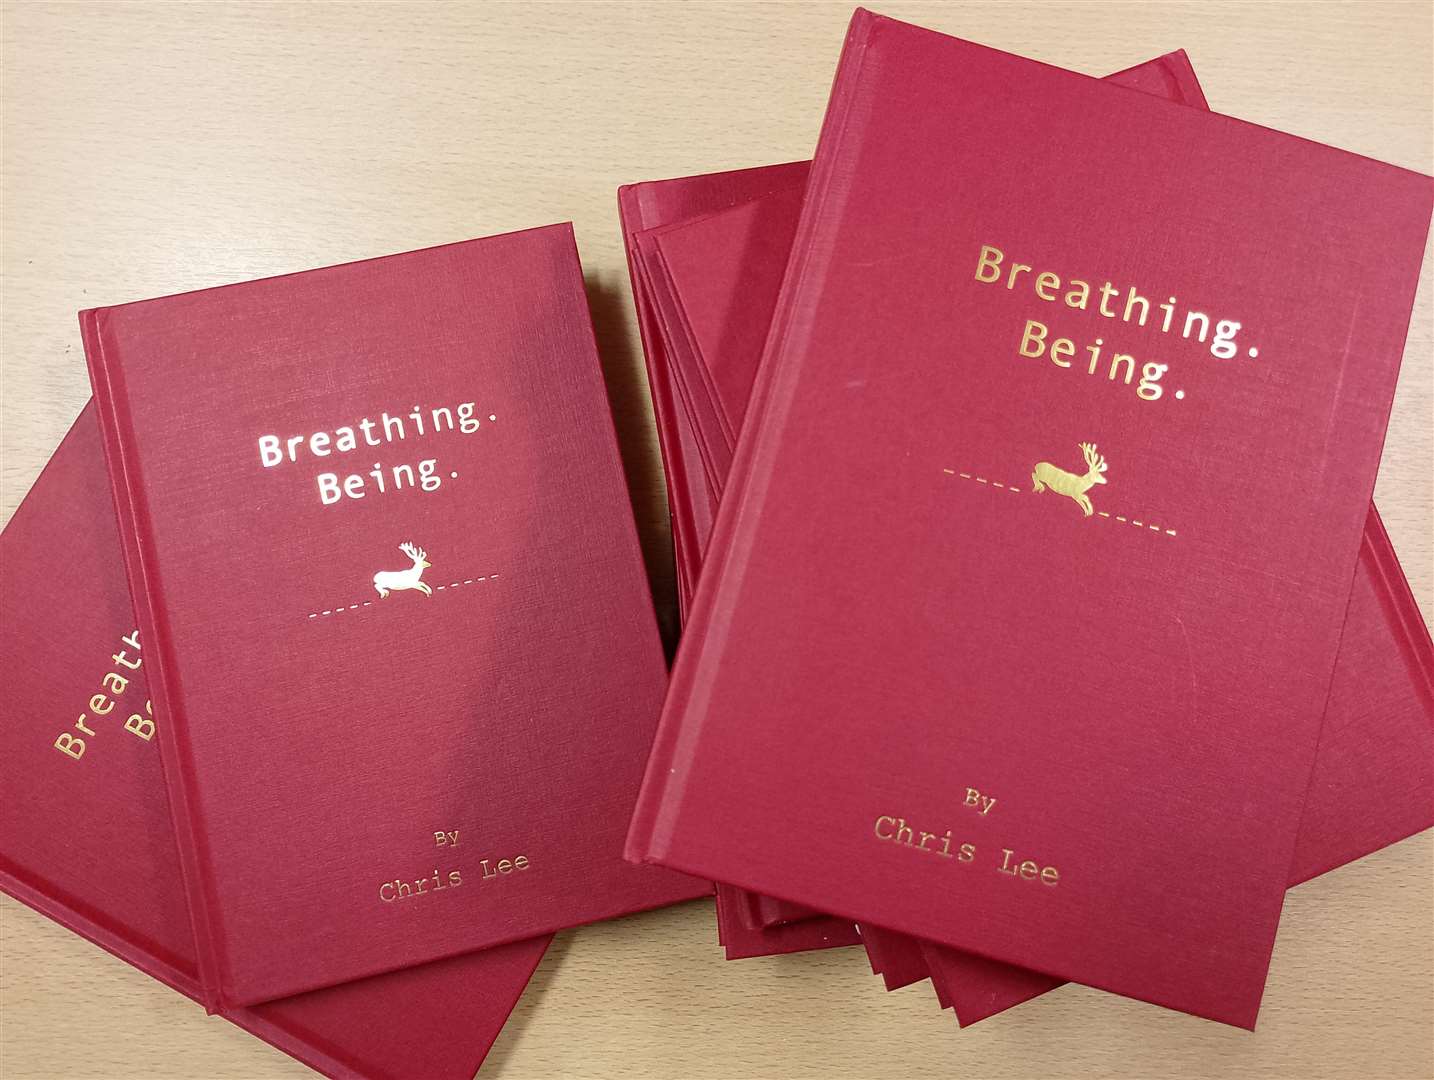 Breathing. Being by Chris Lee. Picture: Graeme Roger